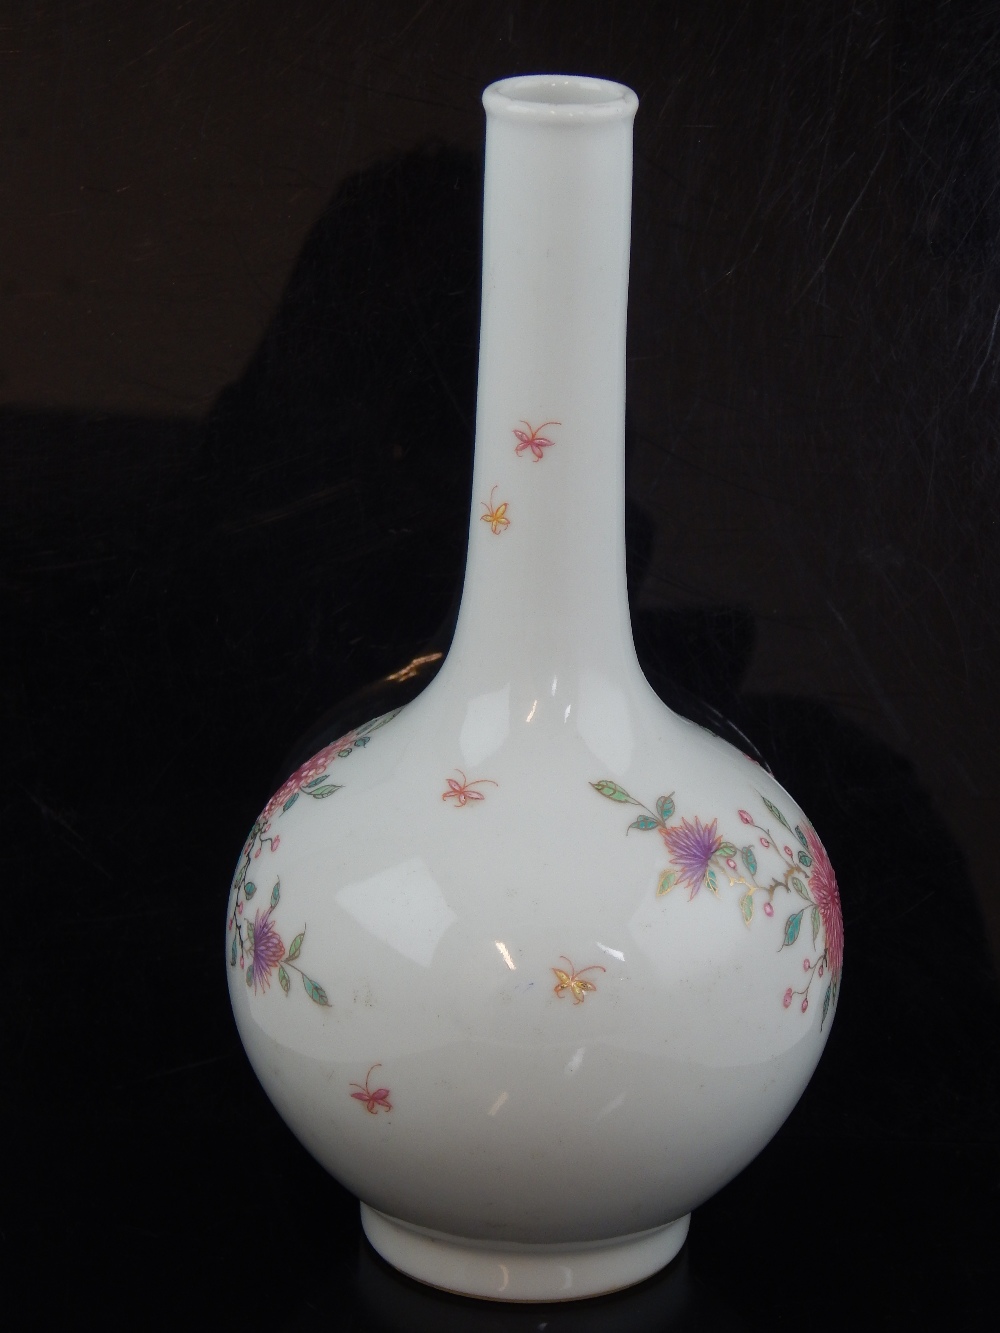 Chinese stem vase all over new blossom and chrysanthemum enamel decoration, blue ink stamp to base, - Image 2 of 3